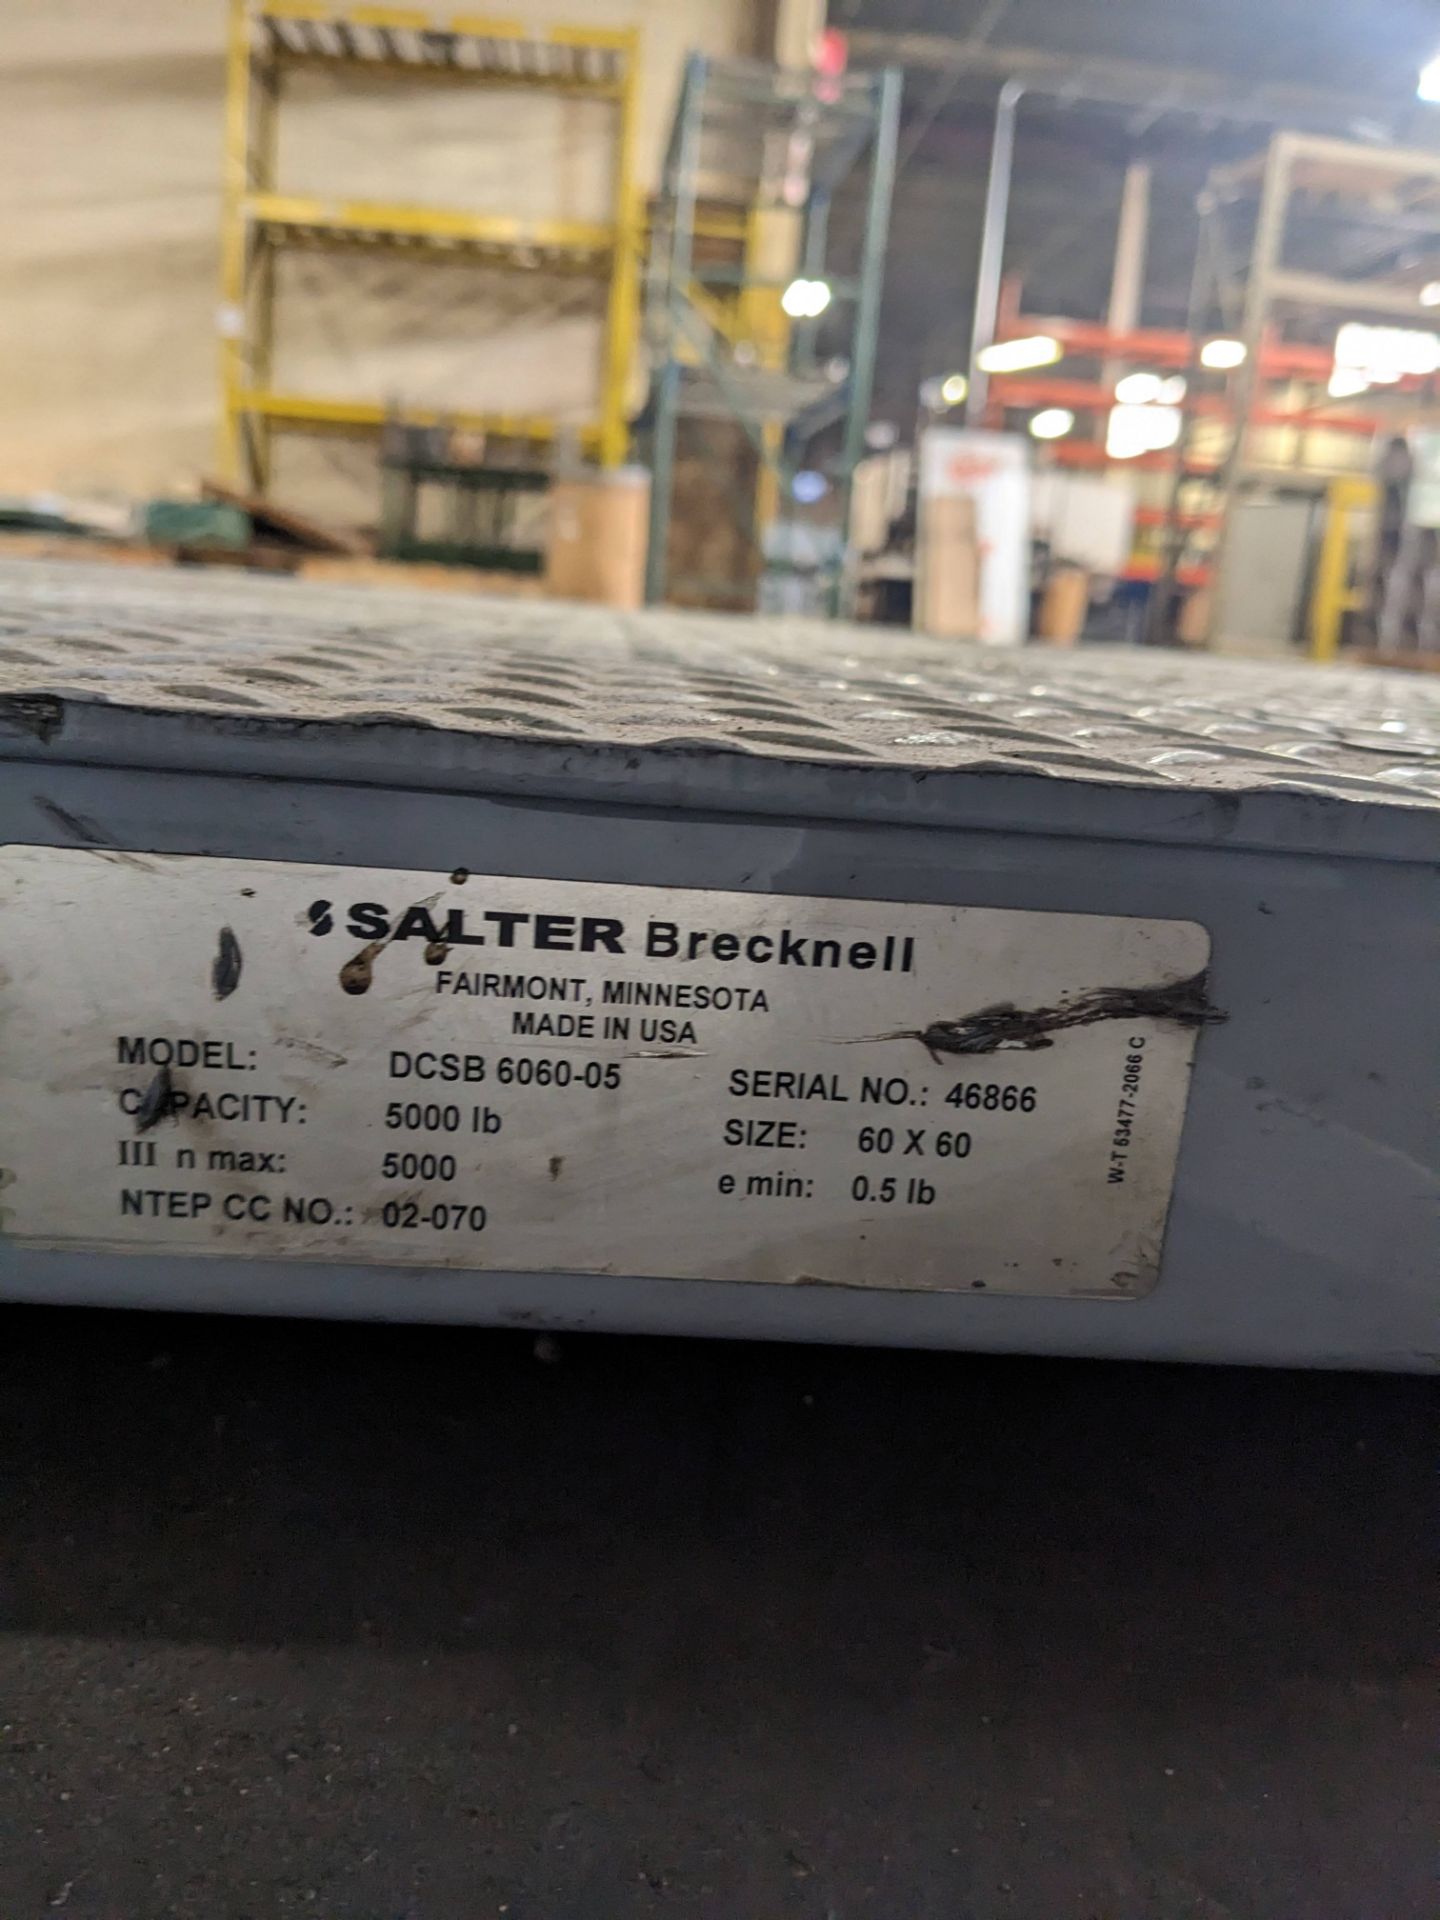 Salter Brecknell Model DCSB 6060-05, 5,000-Lb. Capacity Platform Scale - Image 2 of 3